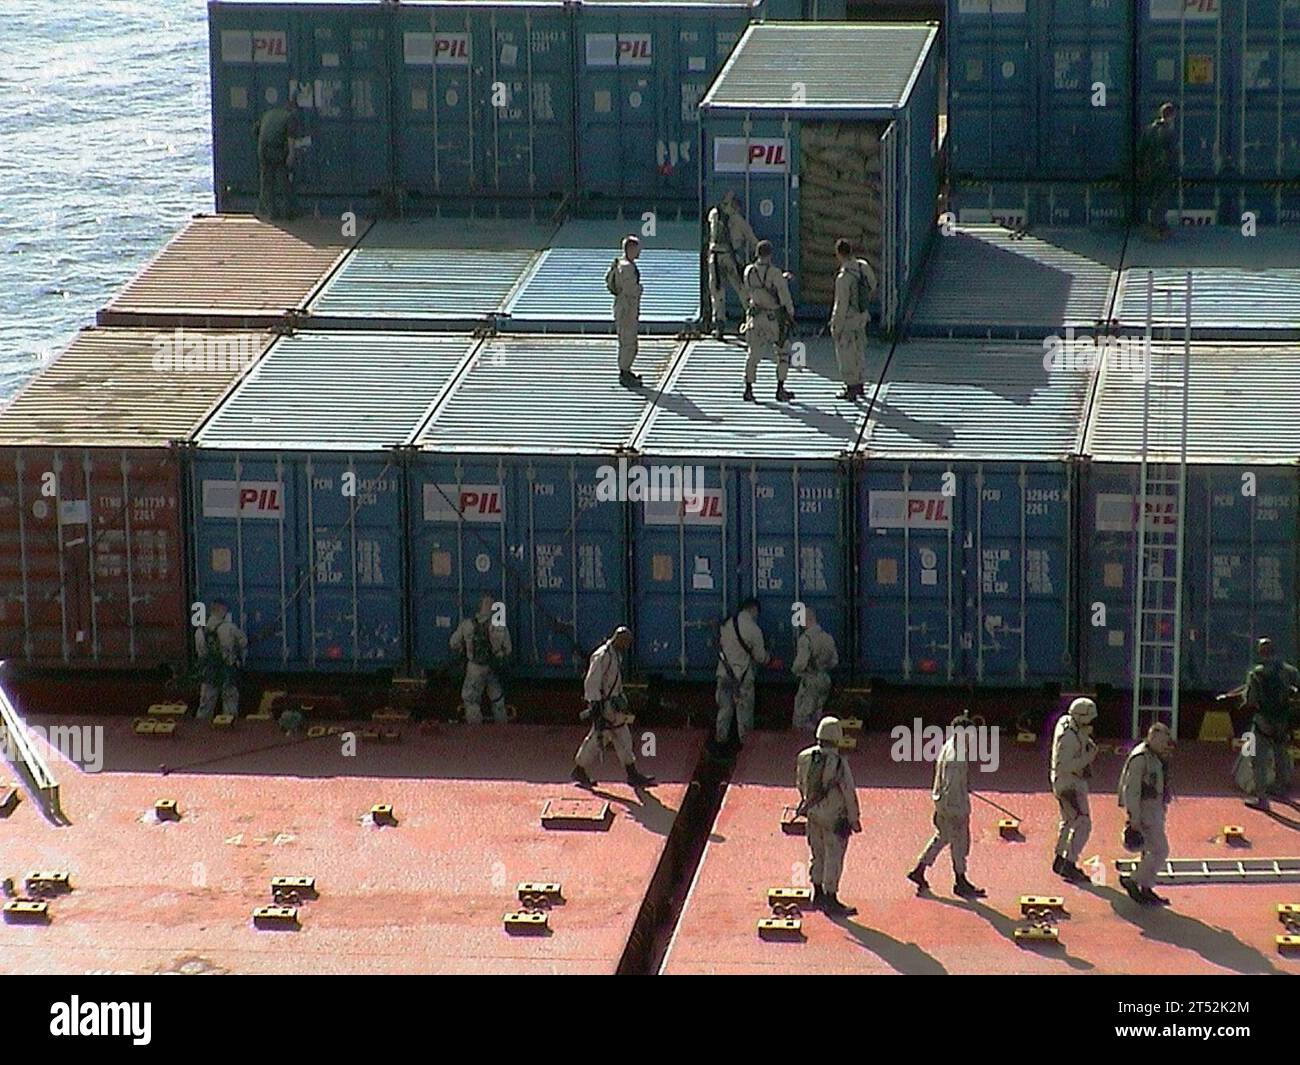 0112066550T-009 The Arabian Sea (Dec. 6, 2001) Р Cargo containers are inspected during a search for illegal contraband and al-Qaida troops aboard the Motor Vessel ТKota Sejarah.У  The boarding and search is conducted by U.S. Navy SEALs and Marines from aboard the amphibious warfare ship USS Shreveport  (LPD 12).  The Shreveport and the Special Warfare (SPECWAR) personnel are deployed in support of Operation Enduring Freedom.  The ship was released following the inspection.  U.S. Navy Stock Photo